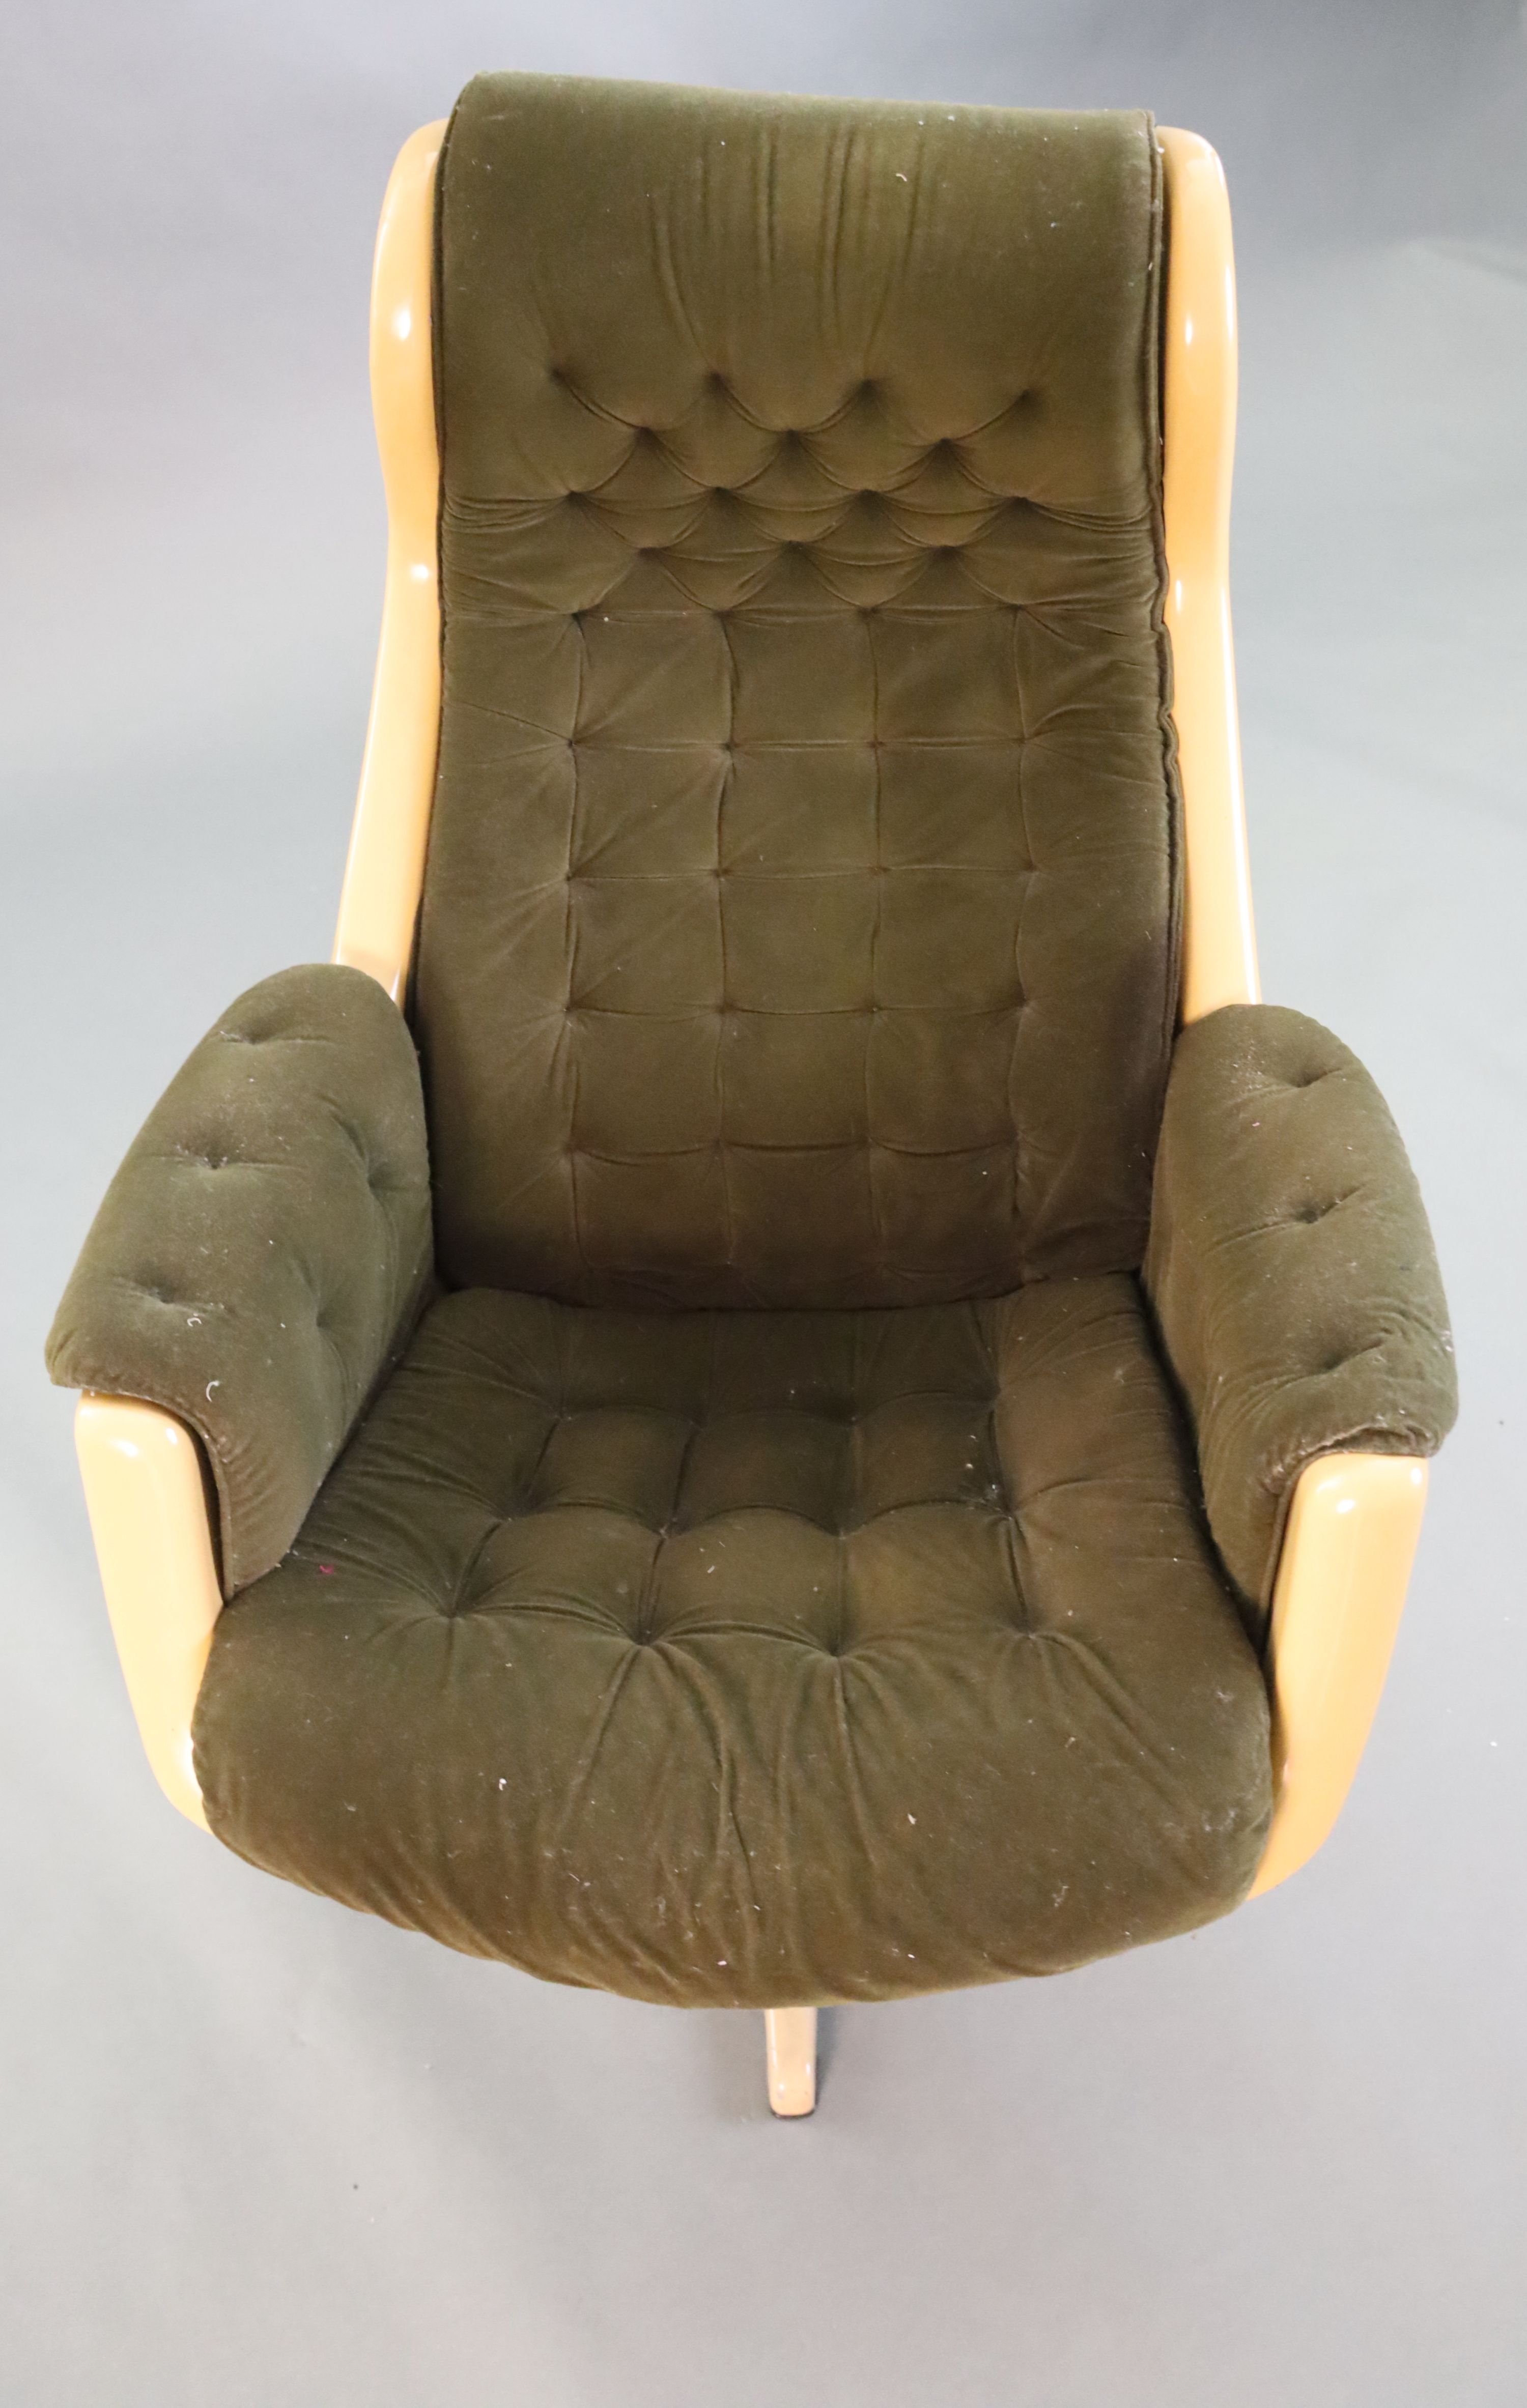 A Svensson and Sandstrom Swedish moulded plastic chair, W.2ft 5in. D.2ft 9in. H.3ft 2in.